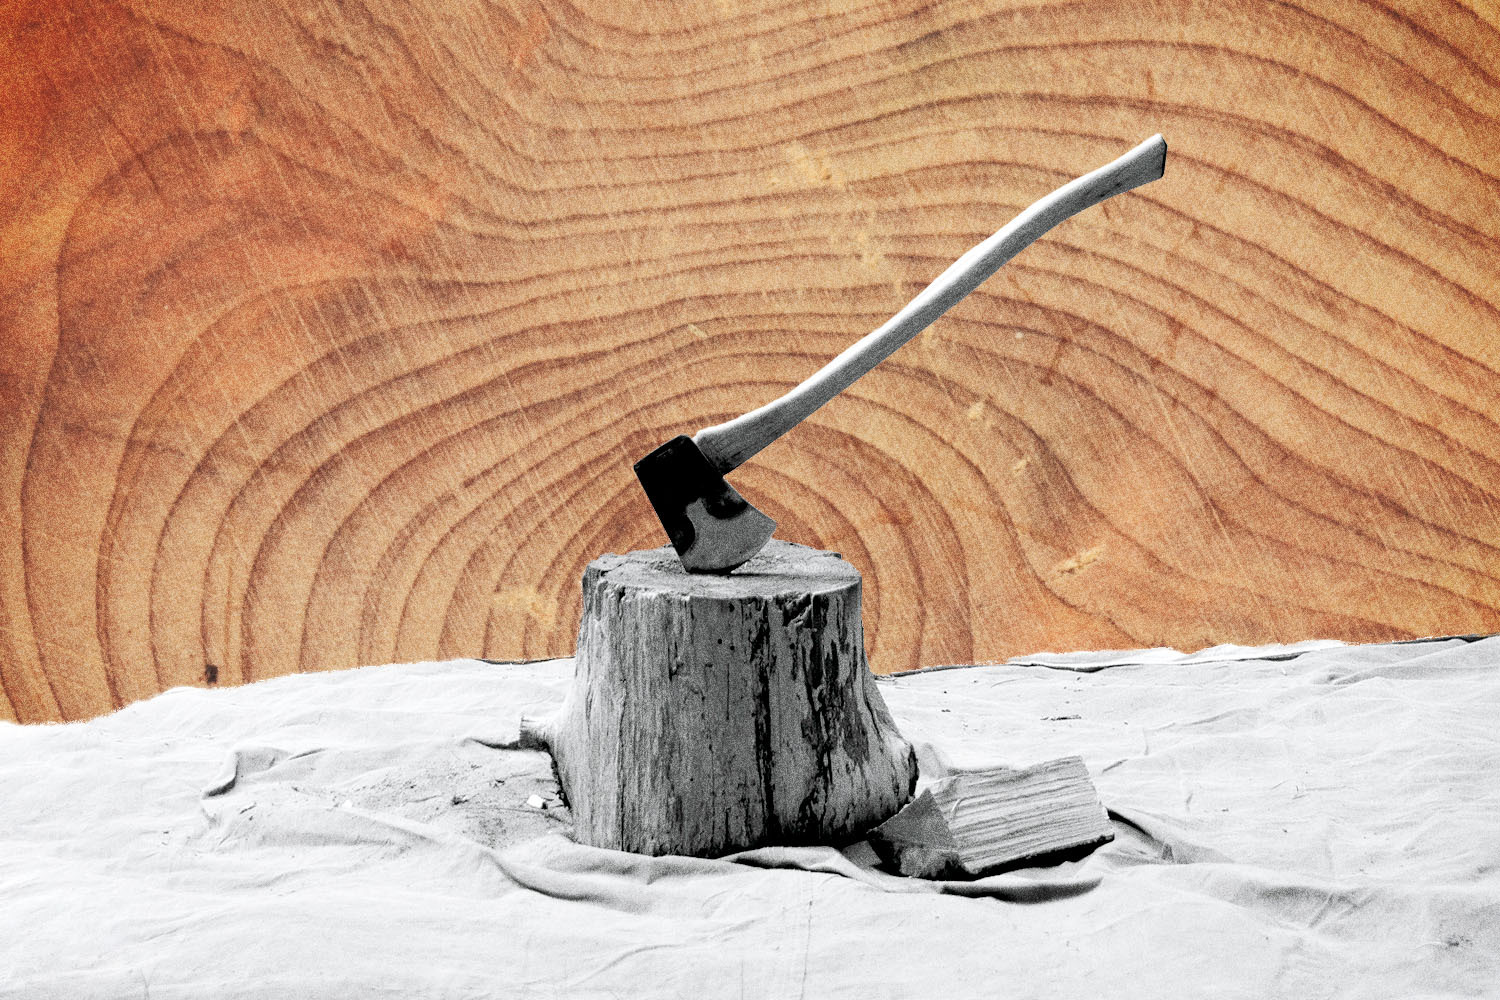 A black and white photo of an axe sticking in a wood stump with a wood-grain background